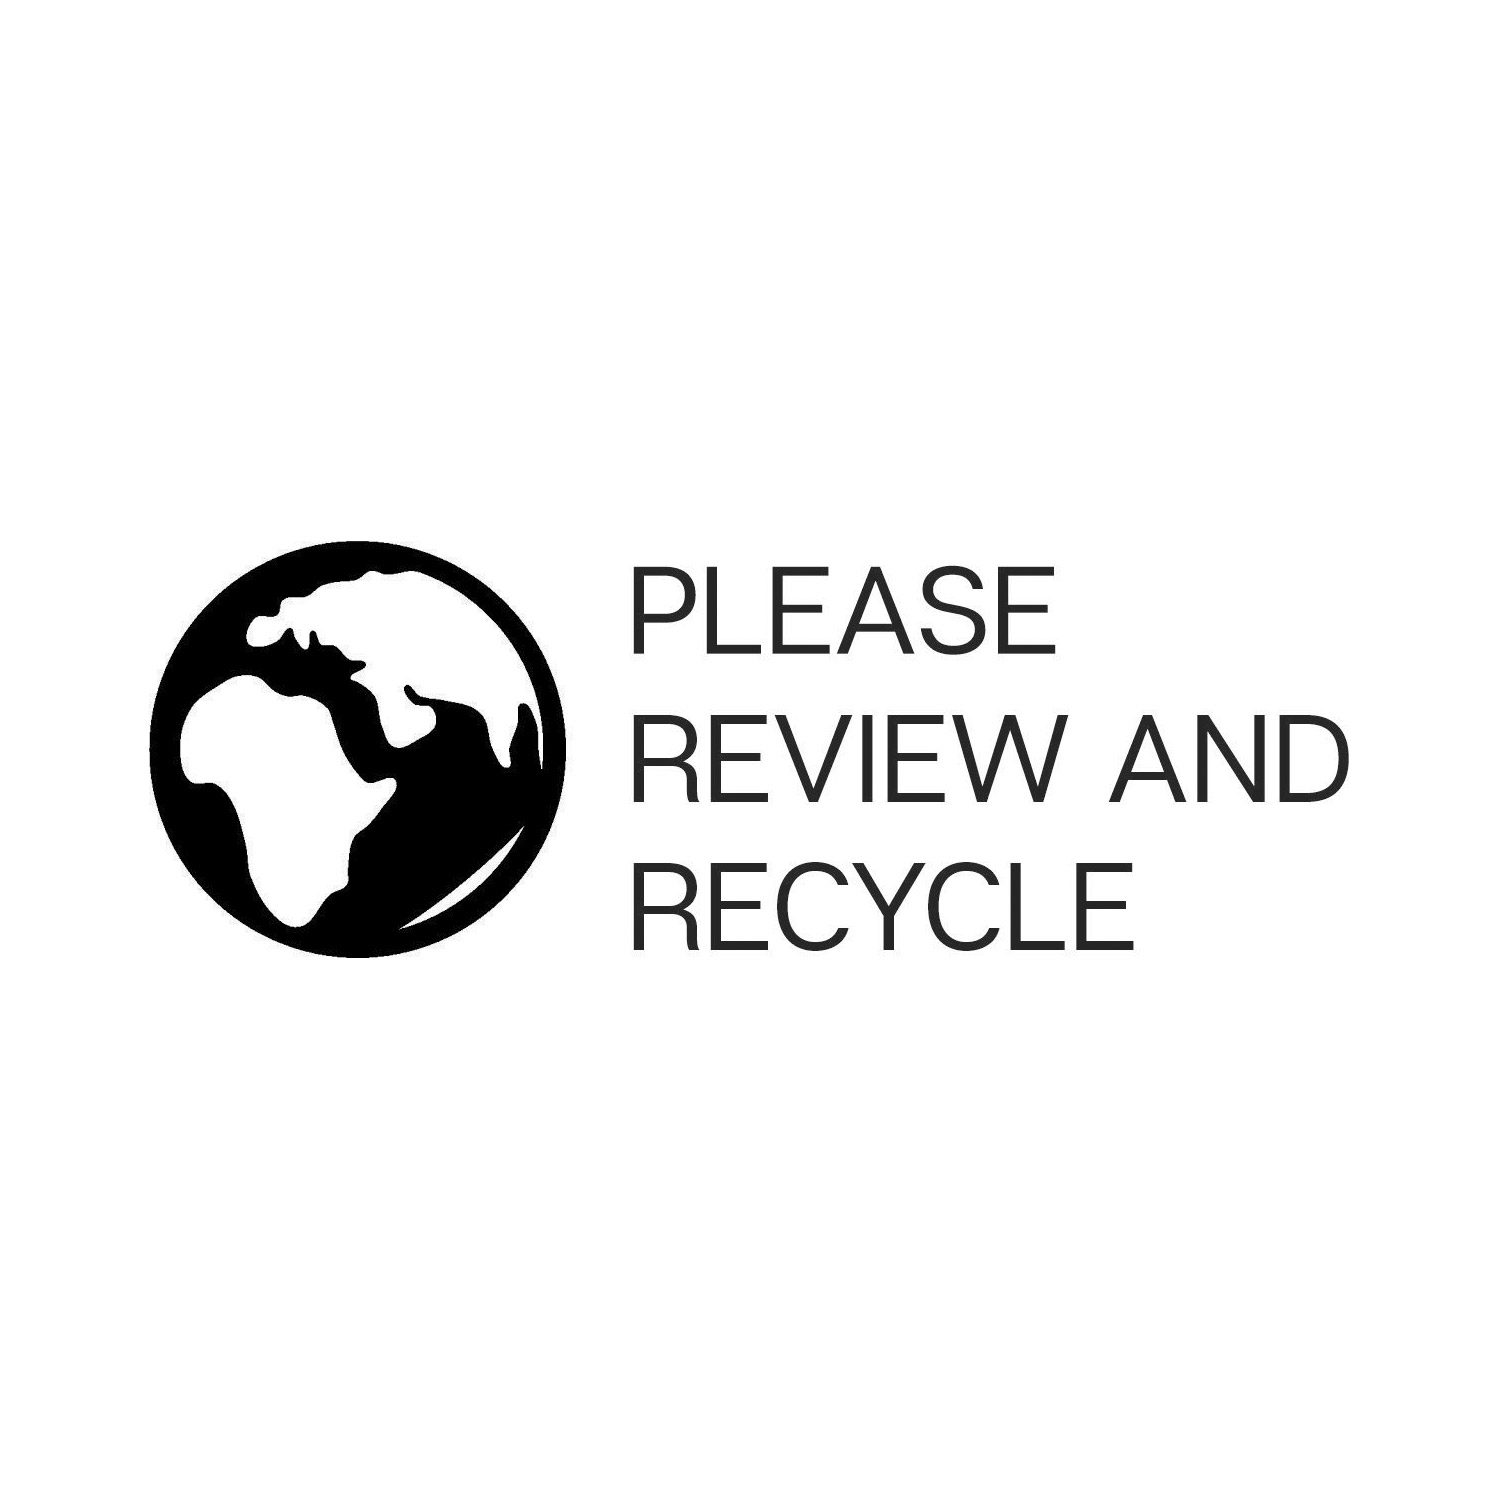 Teacher Stamp 19 - Please Review and Recycle